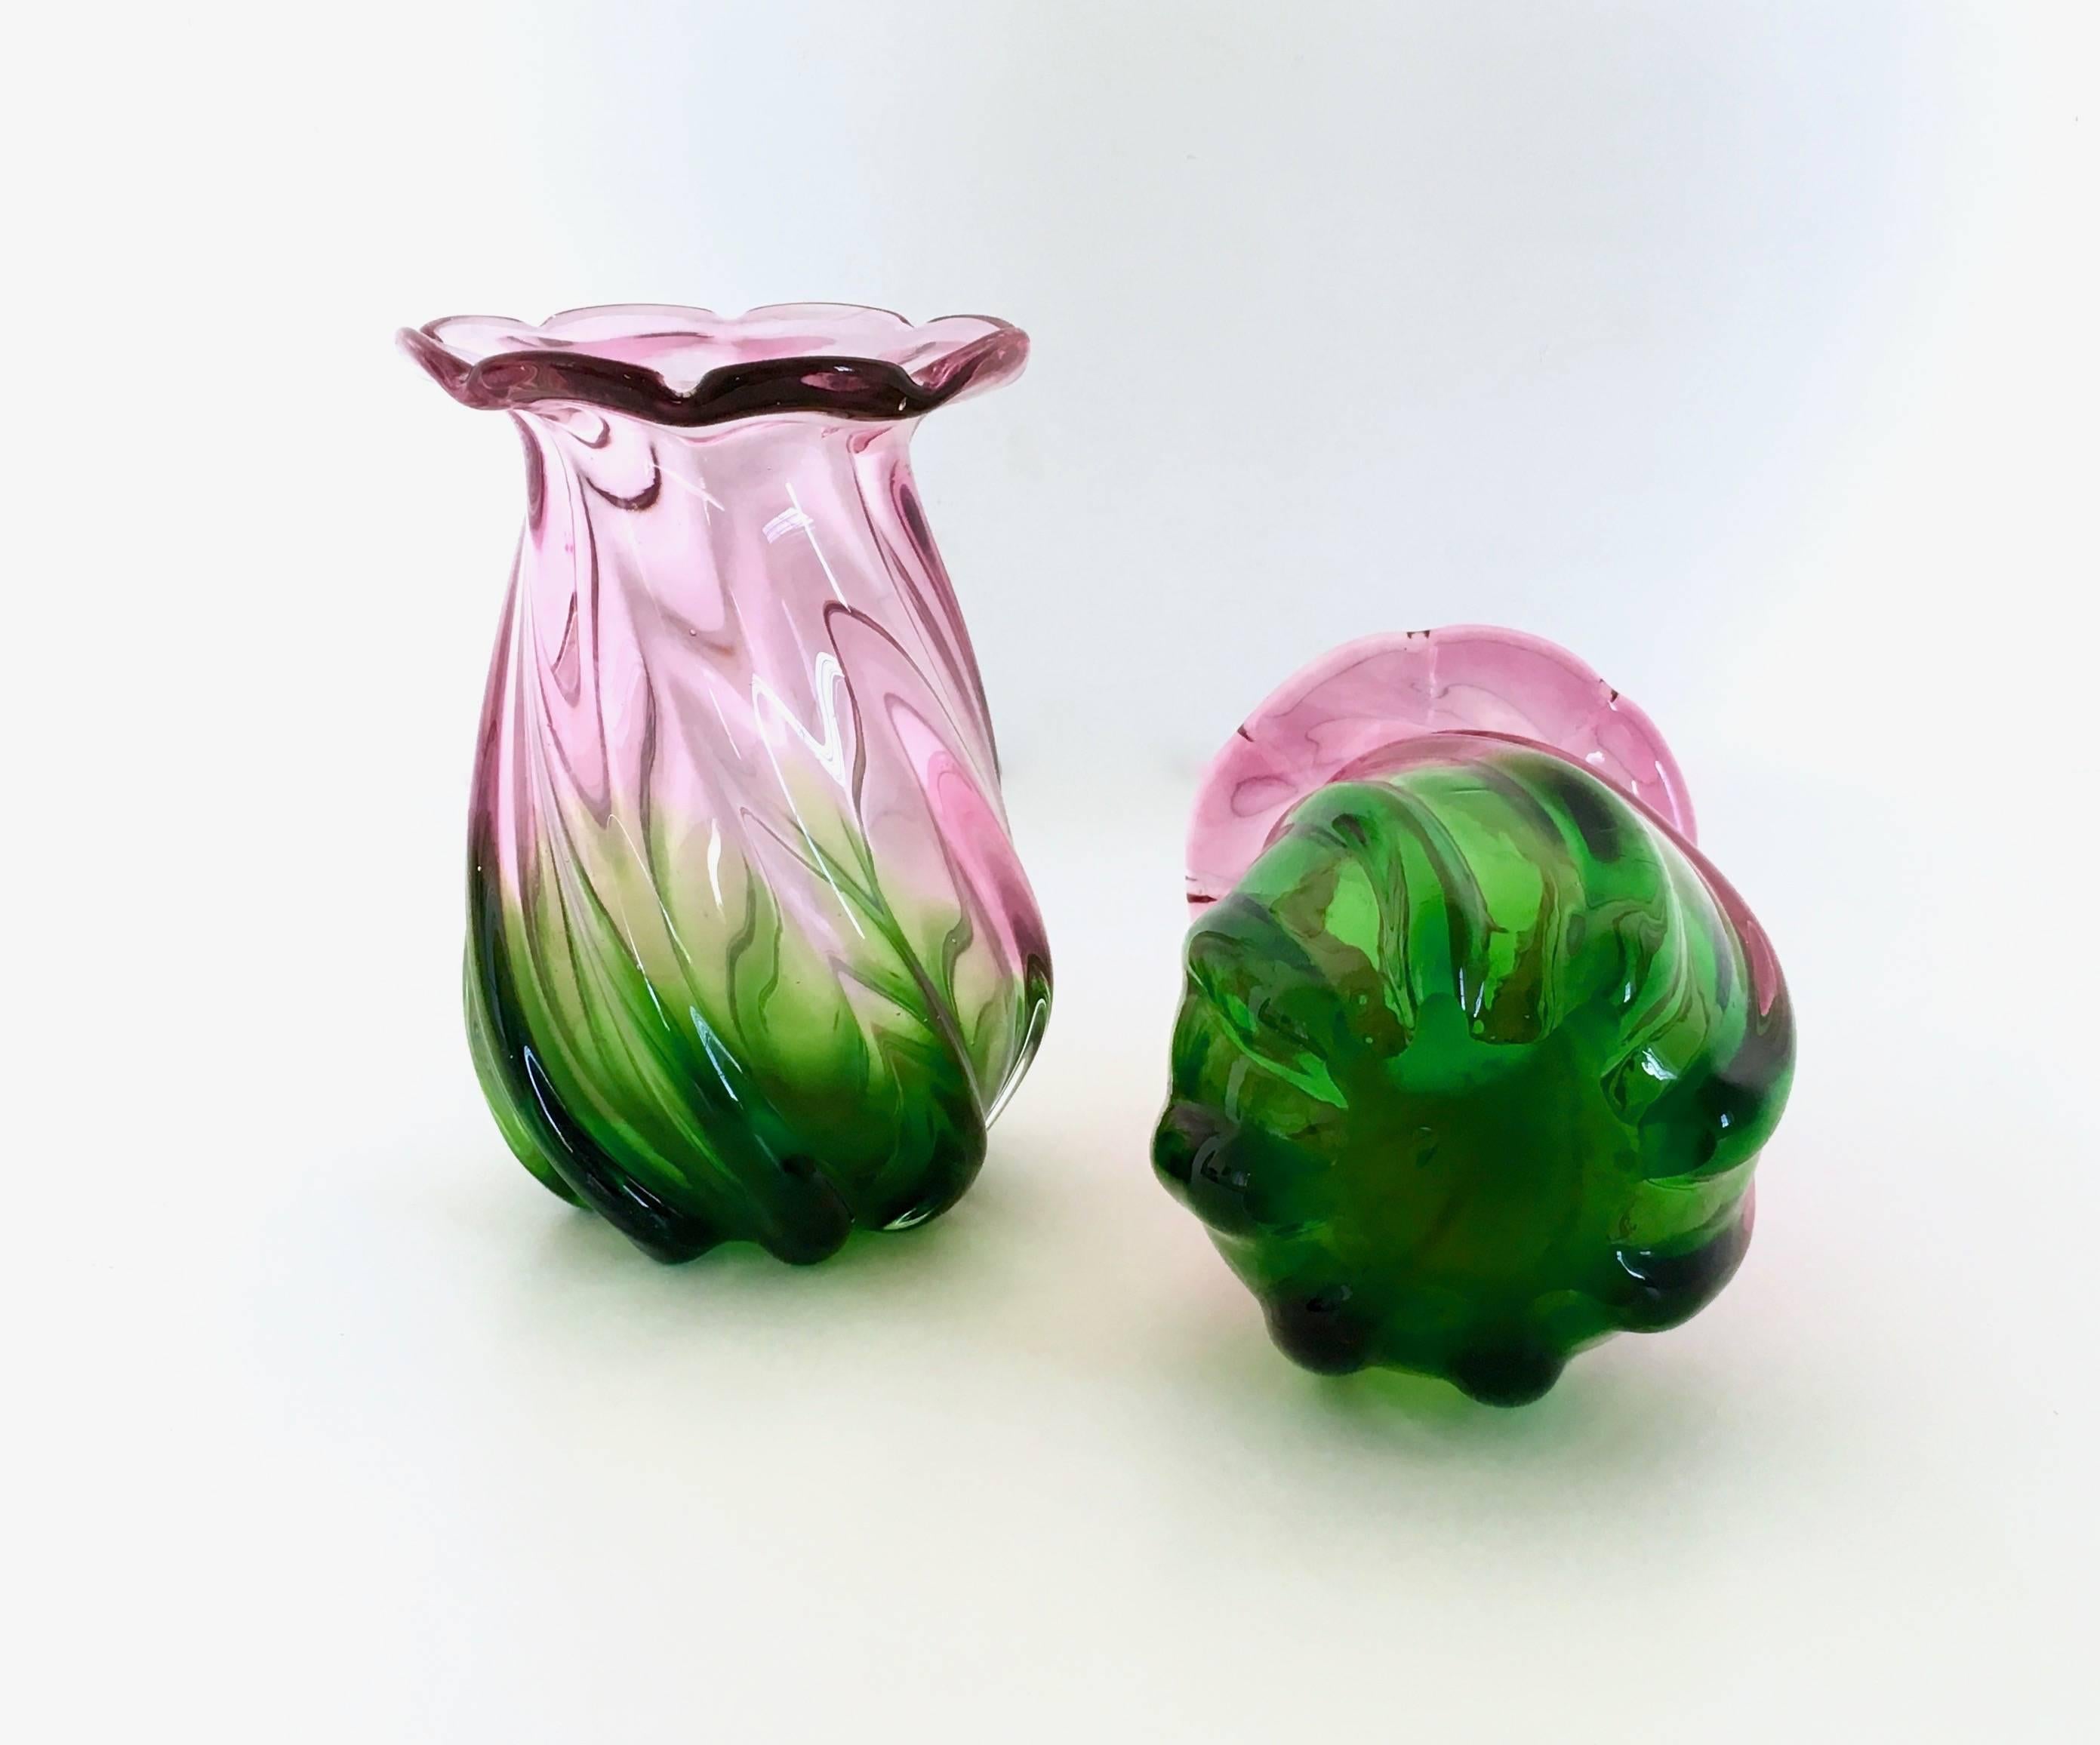 Mid-20th Century Pair of Murano Glass Vases Ascribable to Vetreria Toso, Italy, 1950s